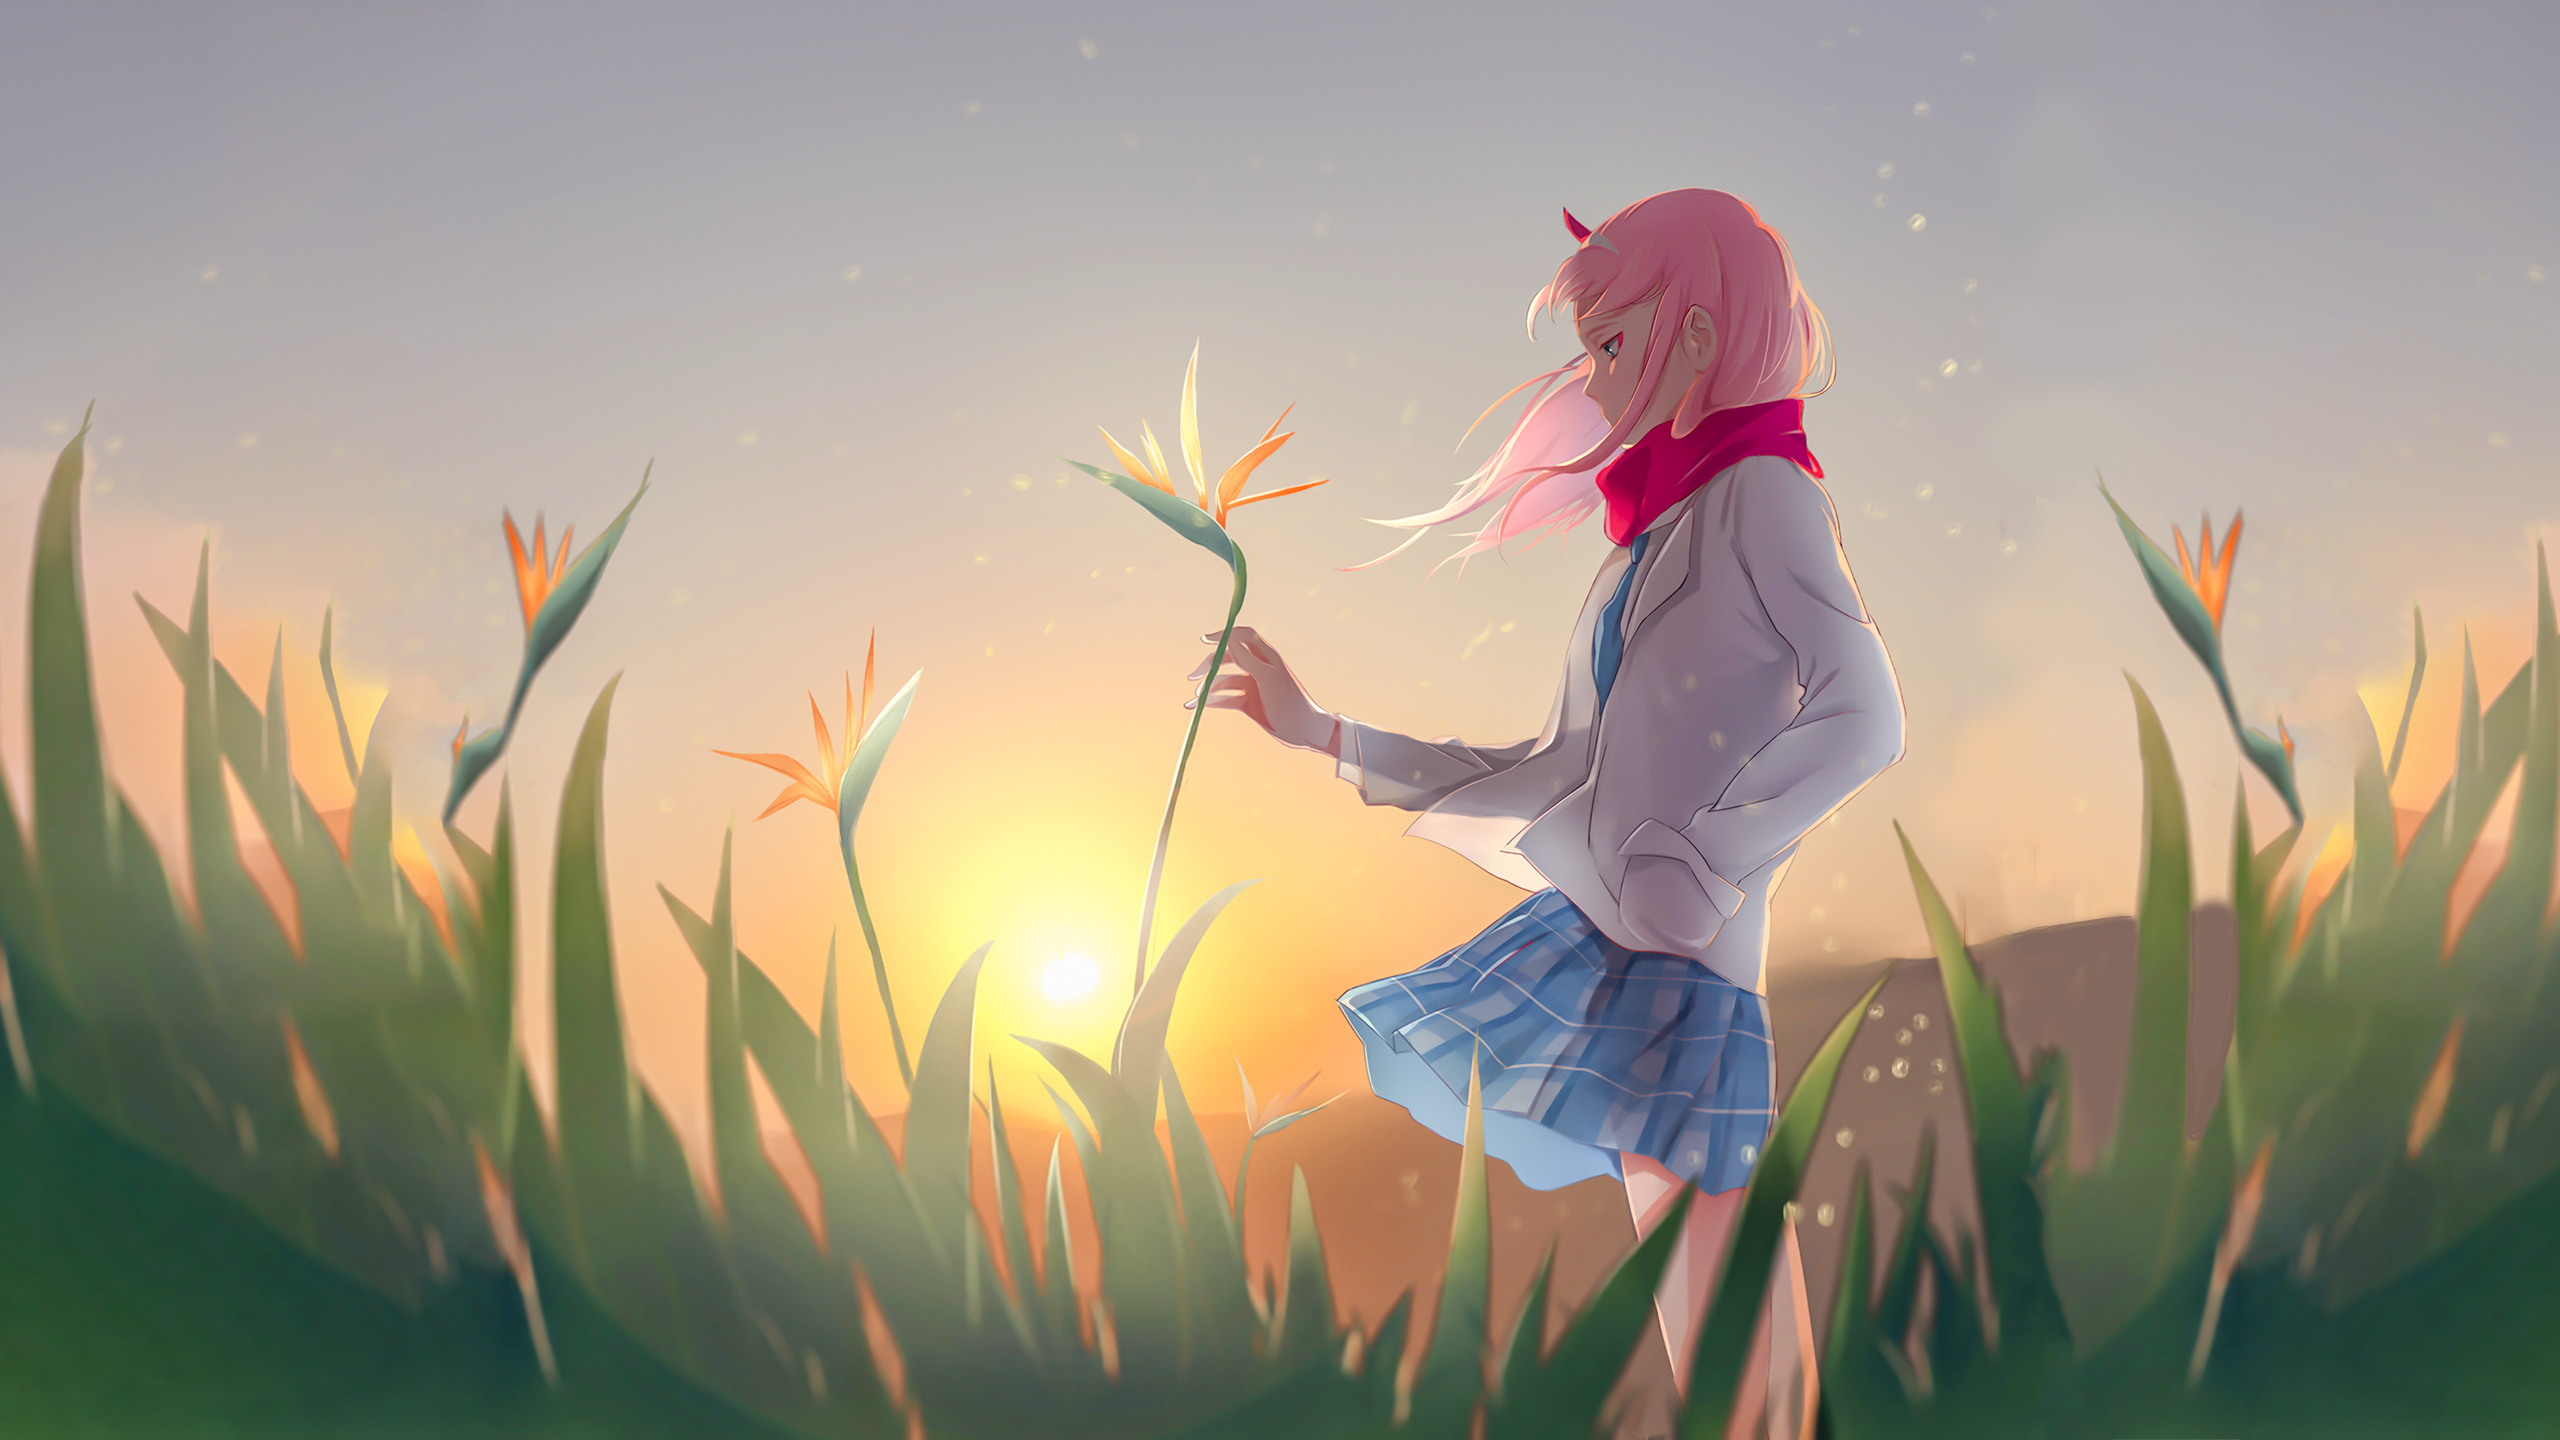 Darling in the franxx pink hair zero two with red scarf is touching yellow flower in sunbeam Wallpaper 2K anime